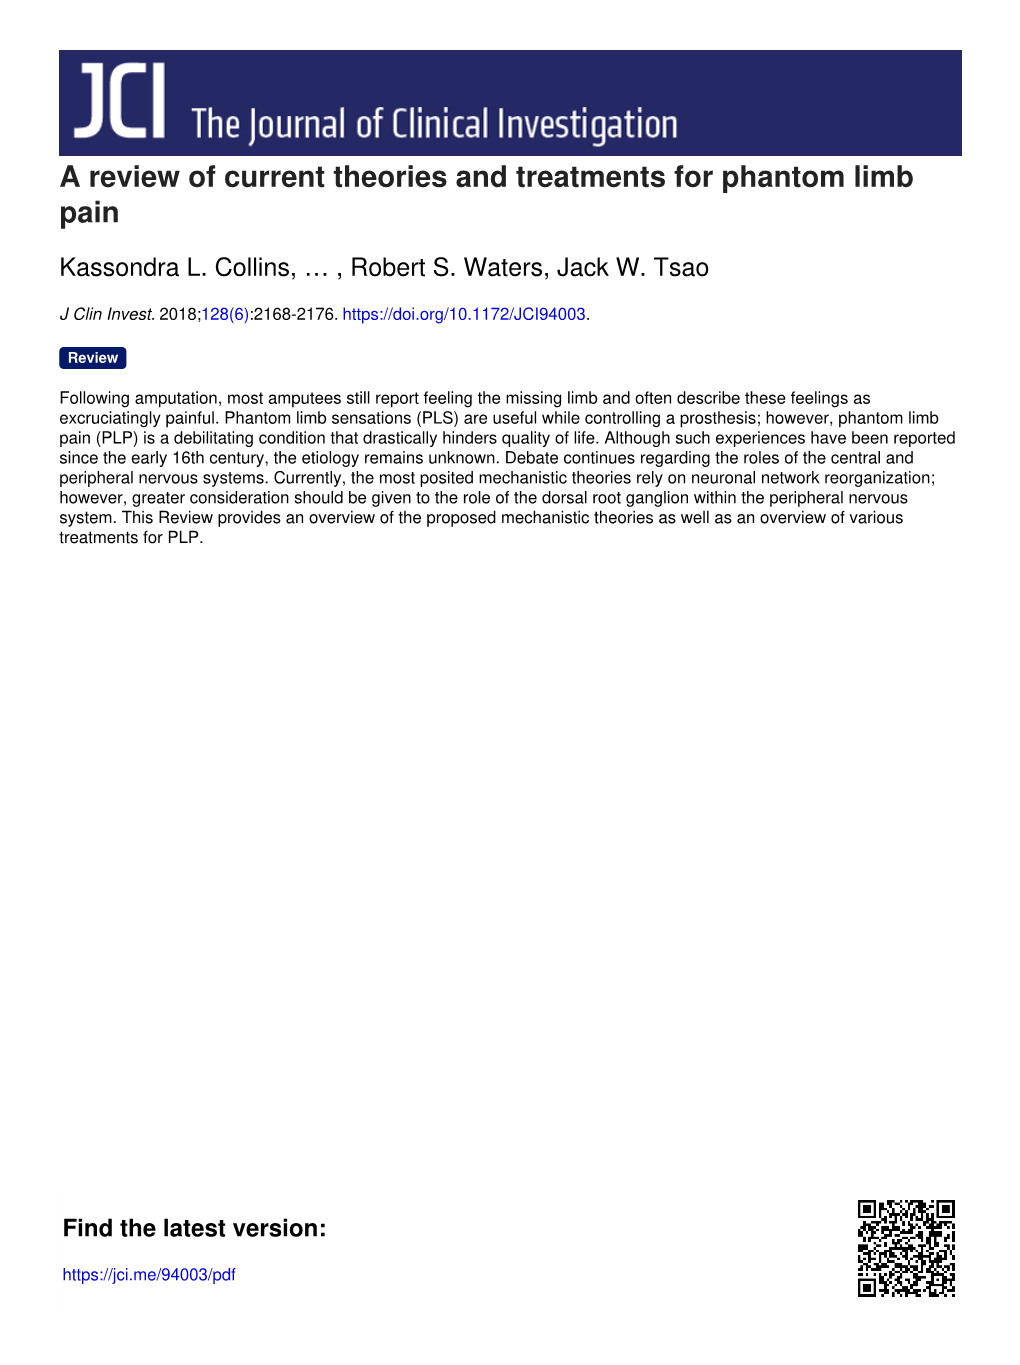 A Review of Current Theories and Treatments for Phantom Limb Pain